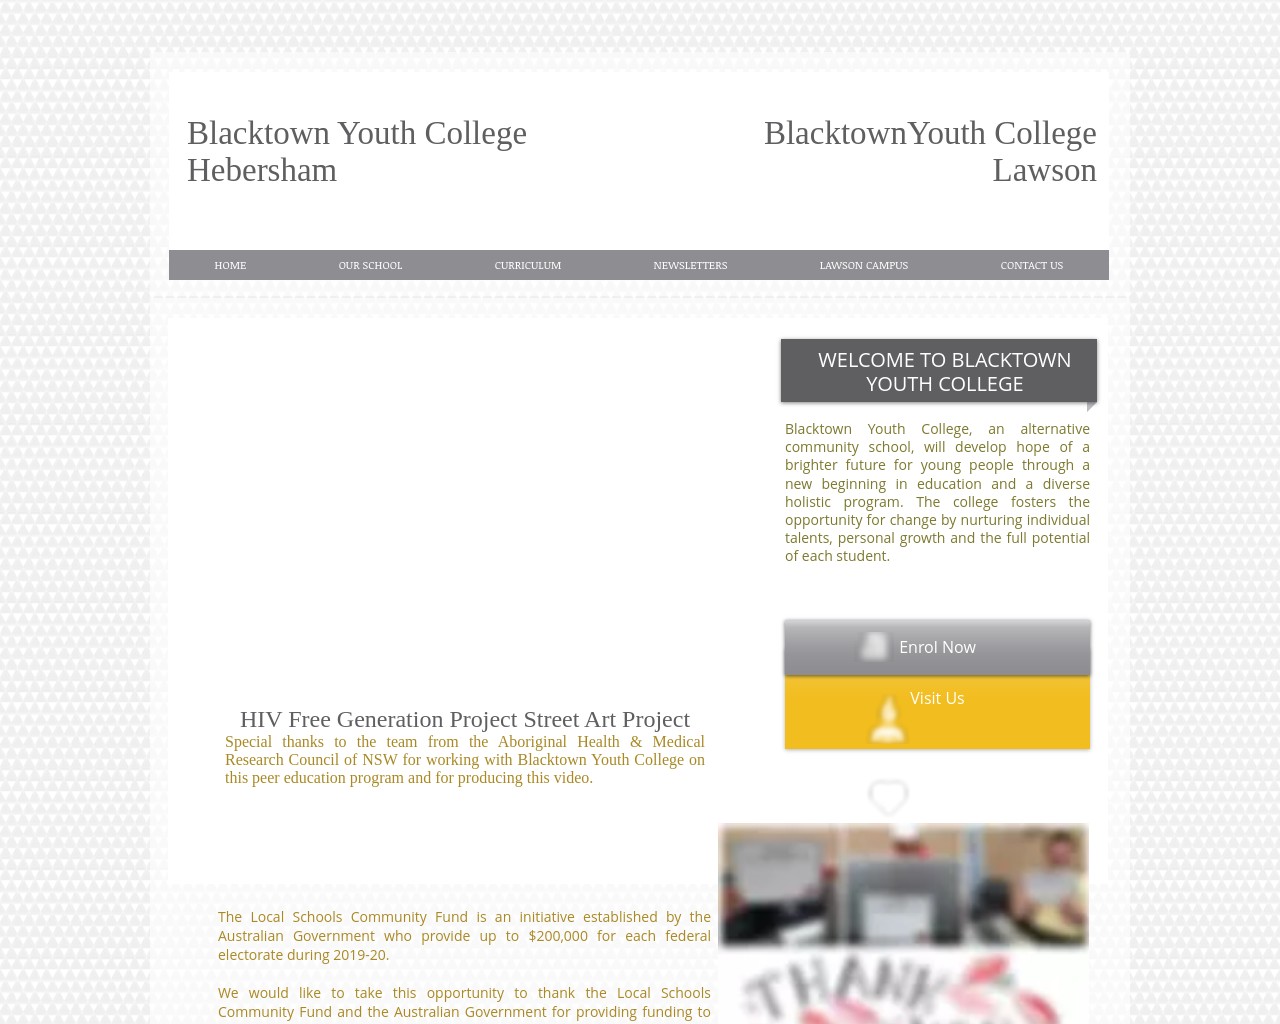 Blacktown Youth College